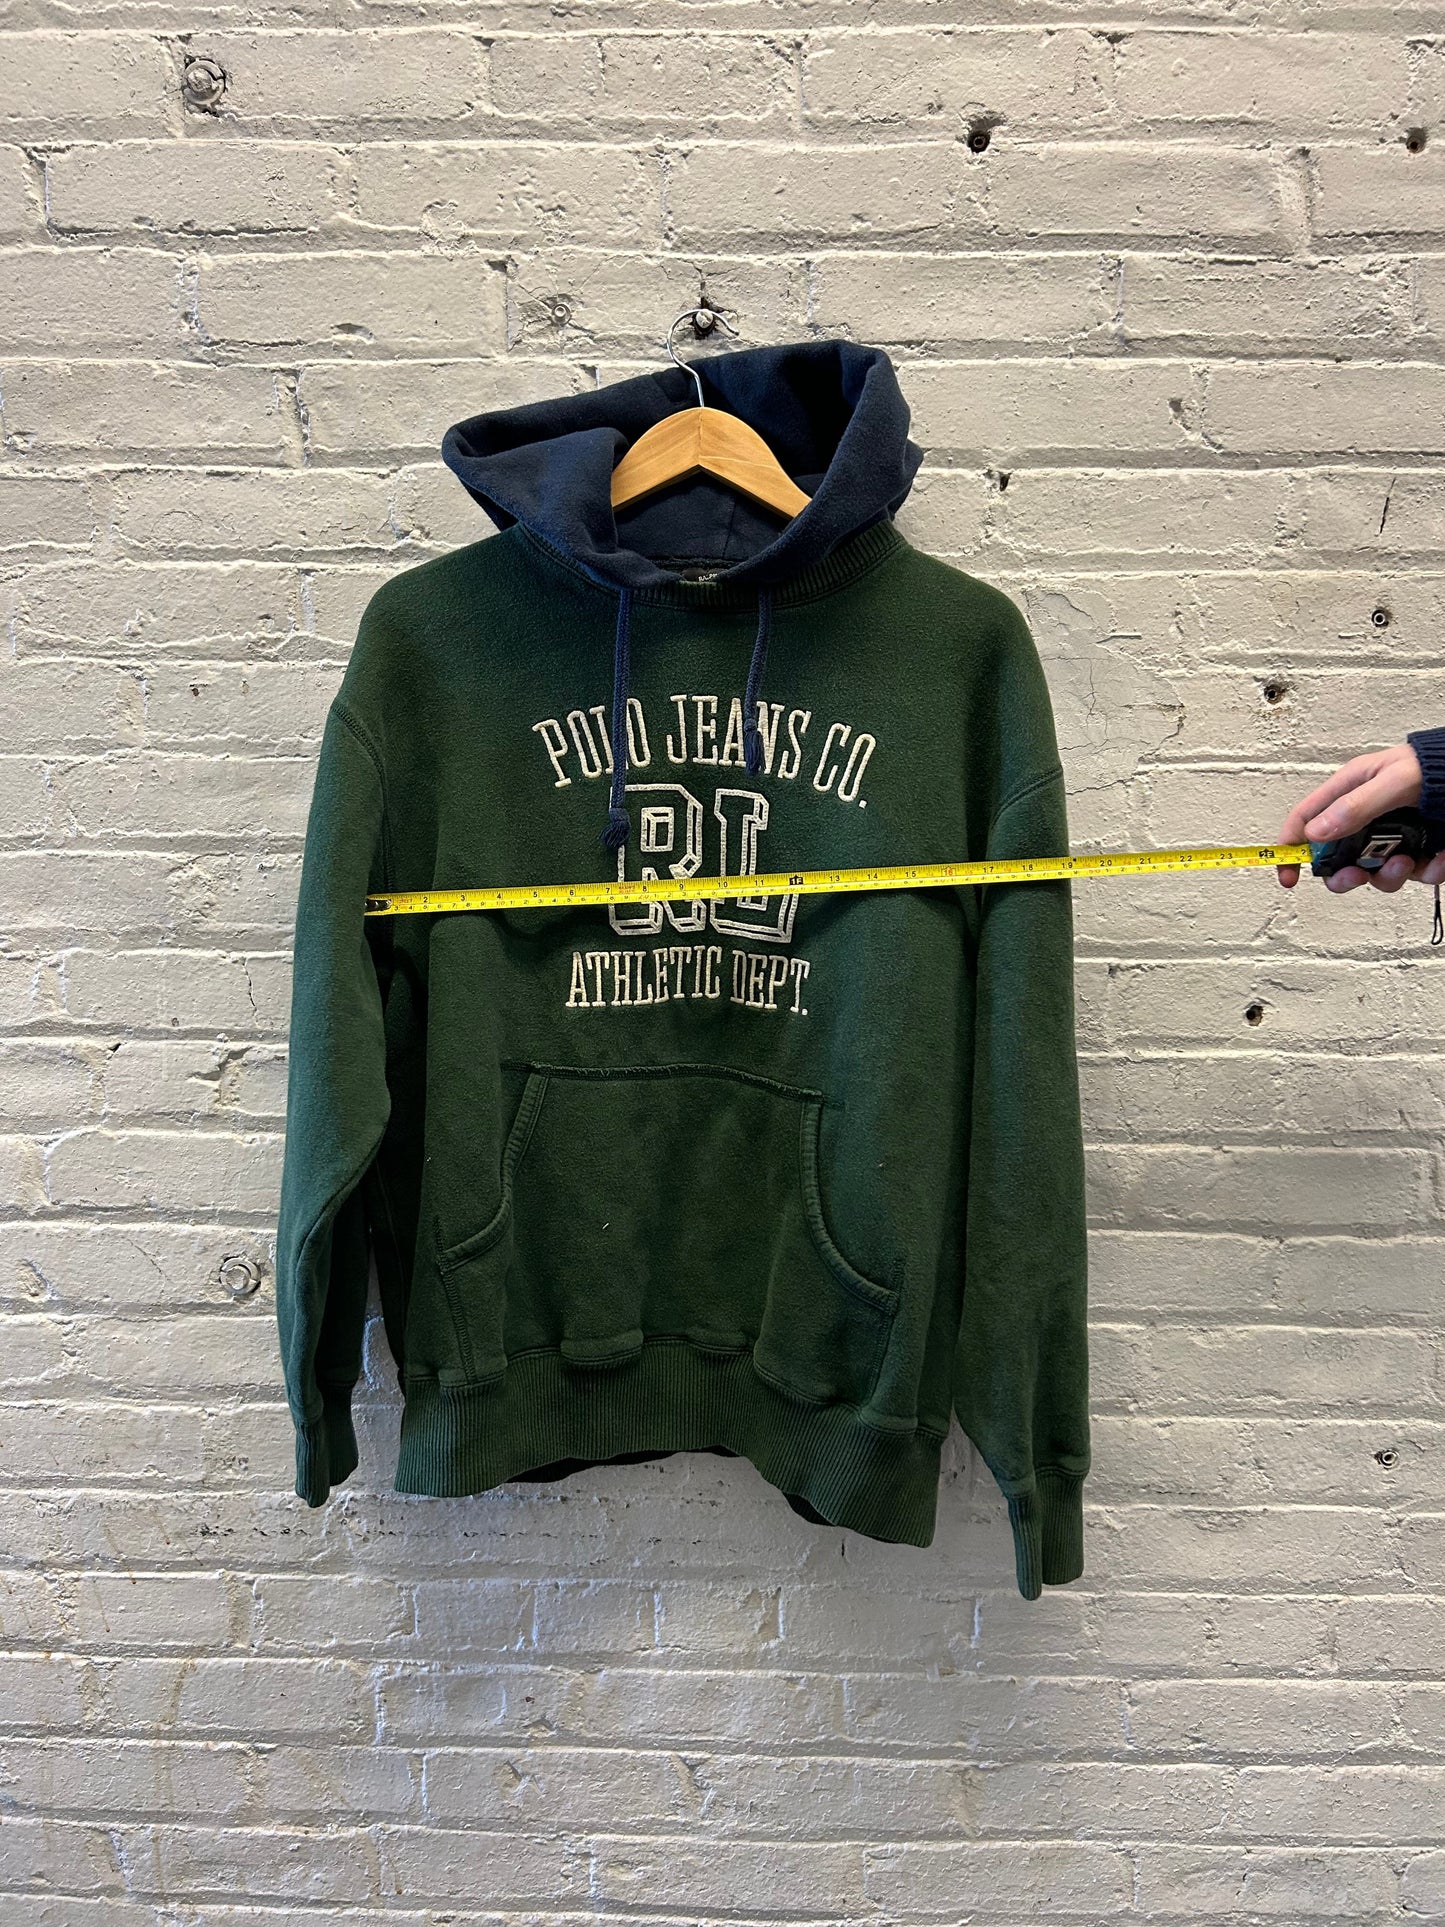 Polo Jeans Co. RL Hoodie - Large